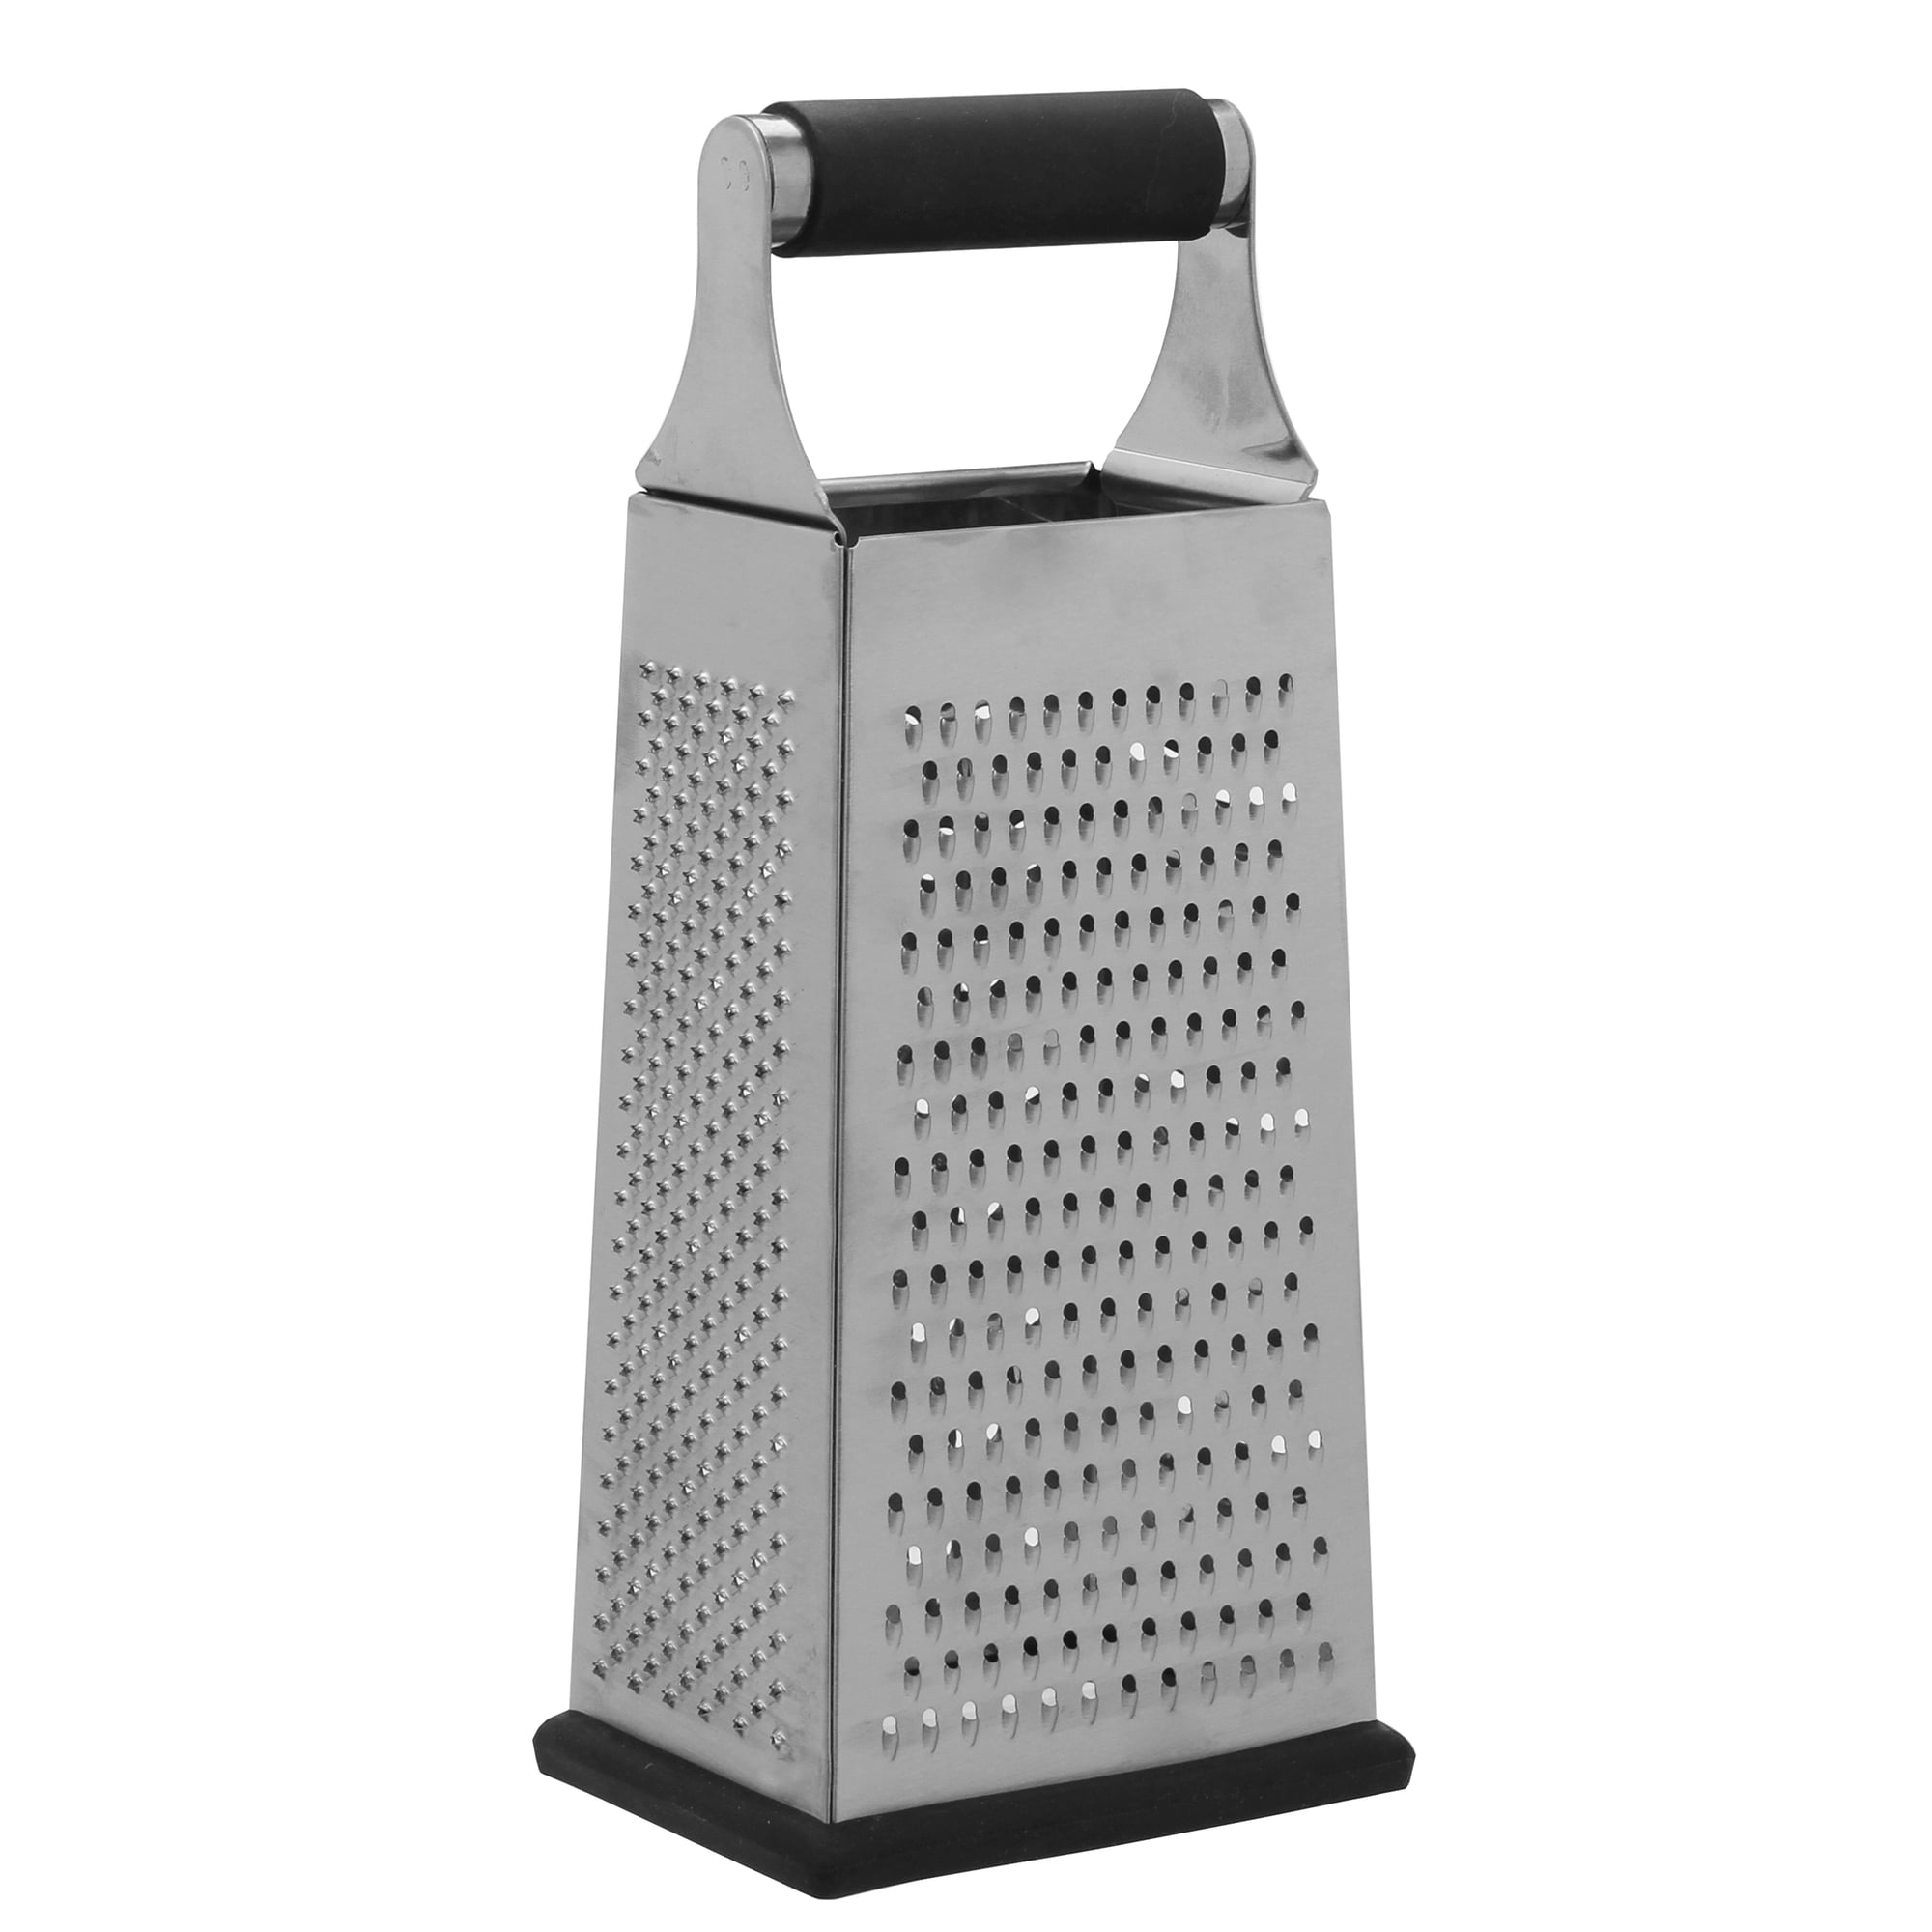 Choice 9 1/2 6-Sided Stainless Steel Box Grater with Soft Grip